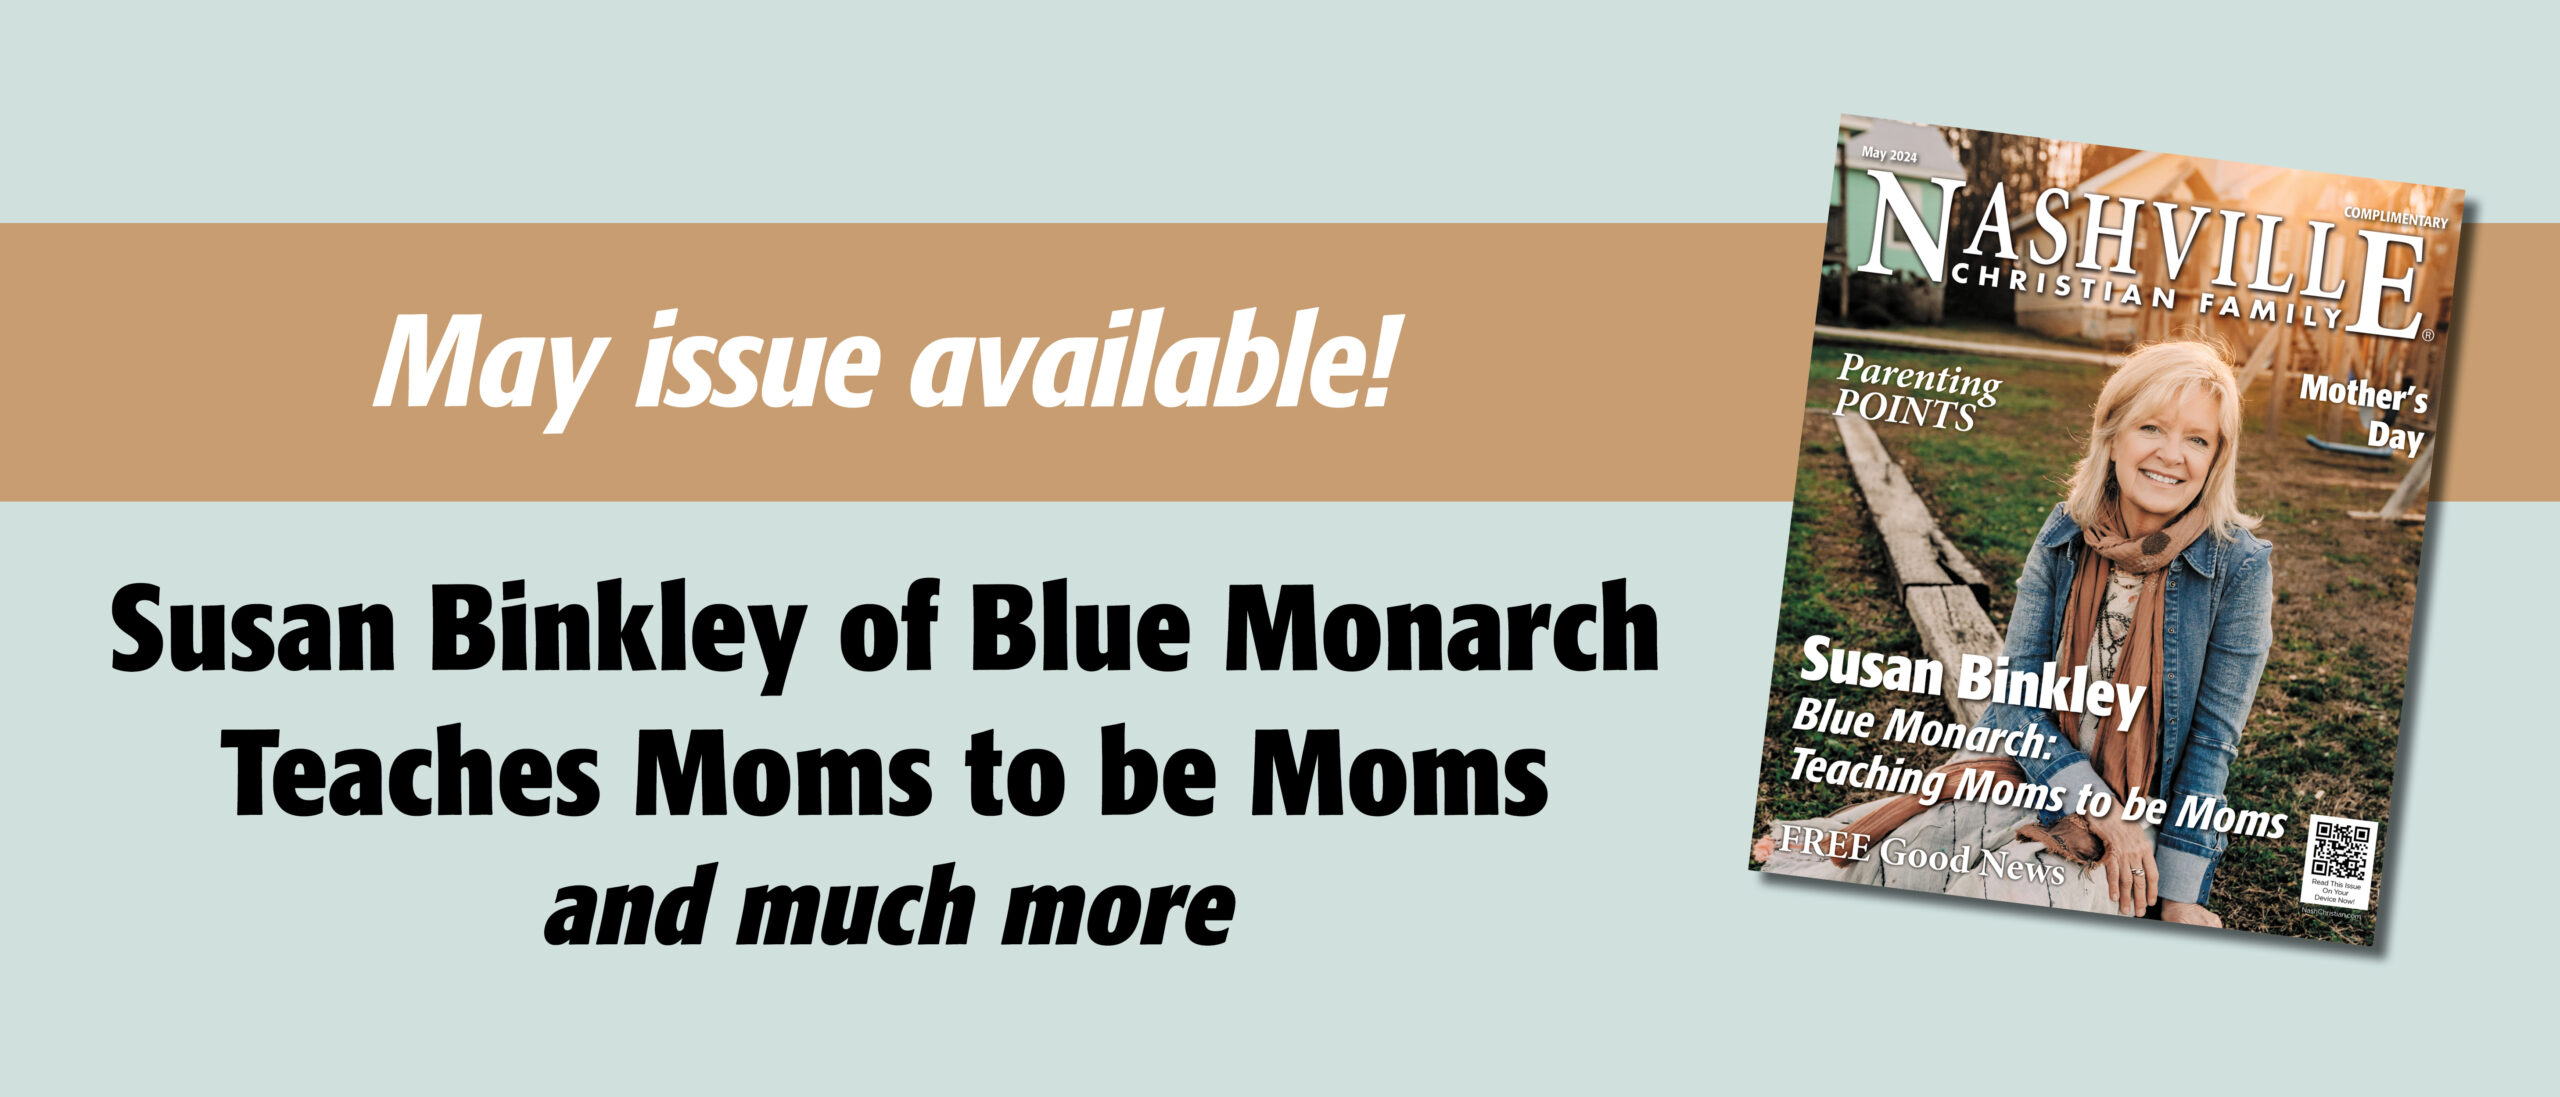 Susan Binkley of Blue Monarch Teaches Moms to be Moms - featured article | Nashville Christian Family Magazine